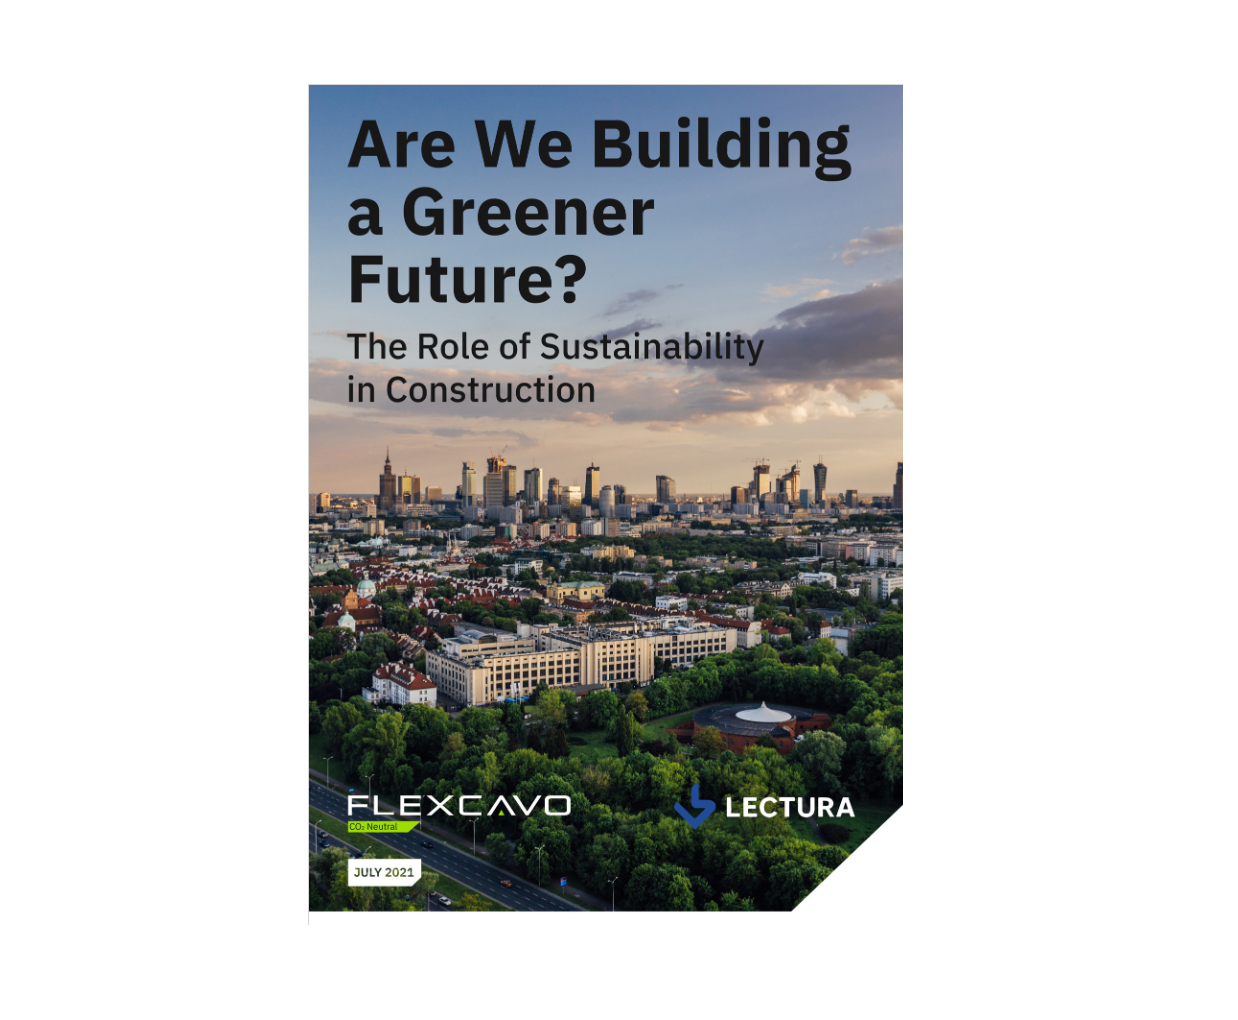 Are we building a greener future? By Flexcavo and LECTURA